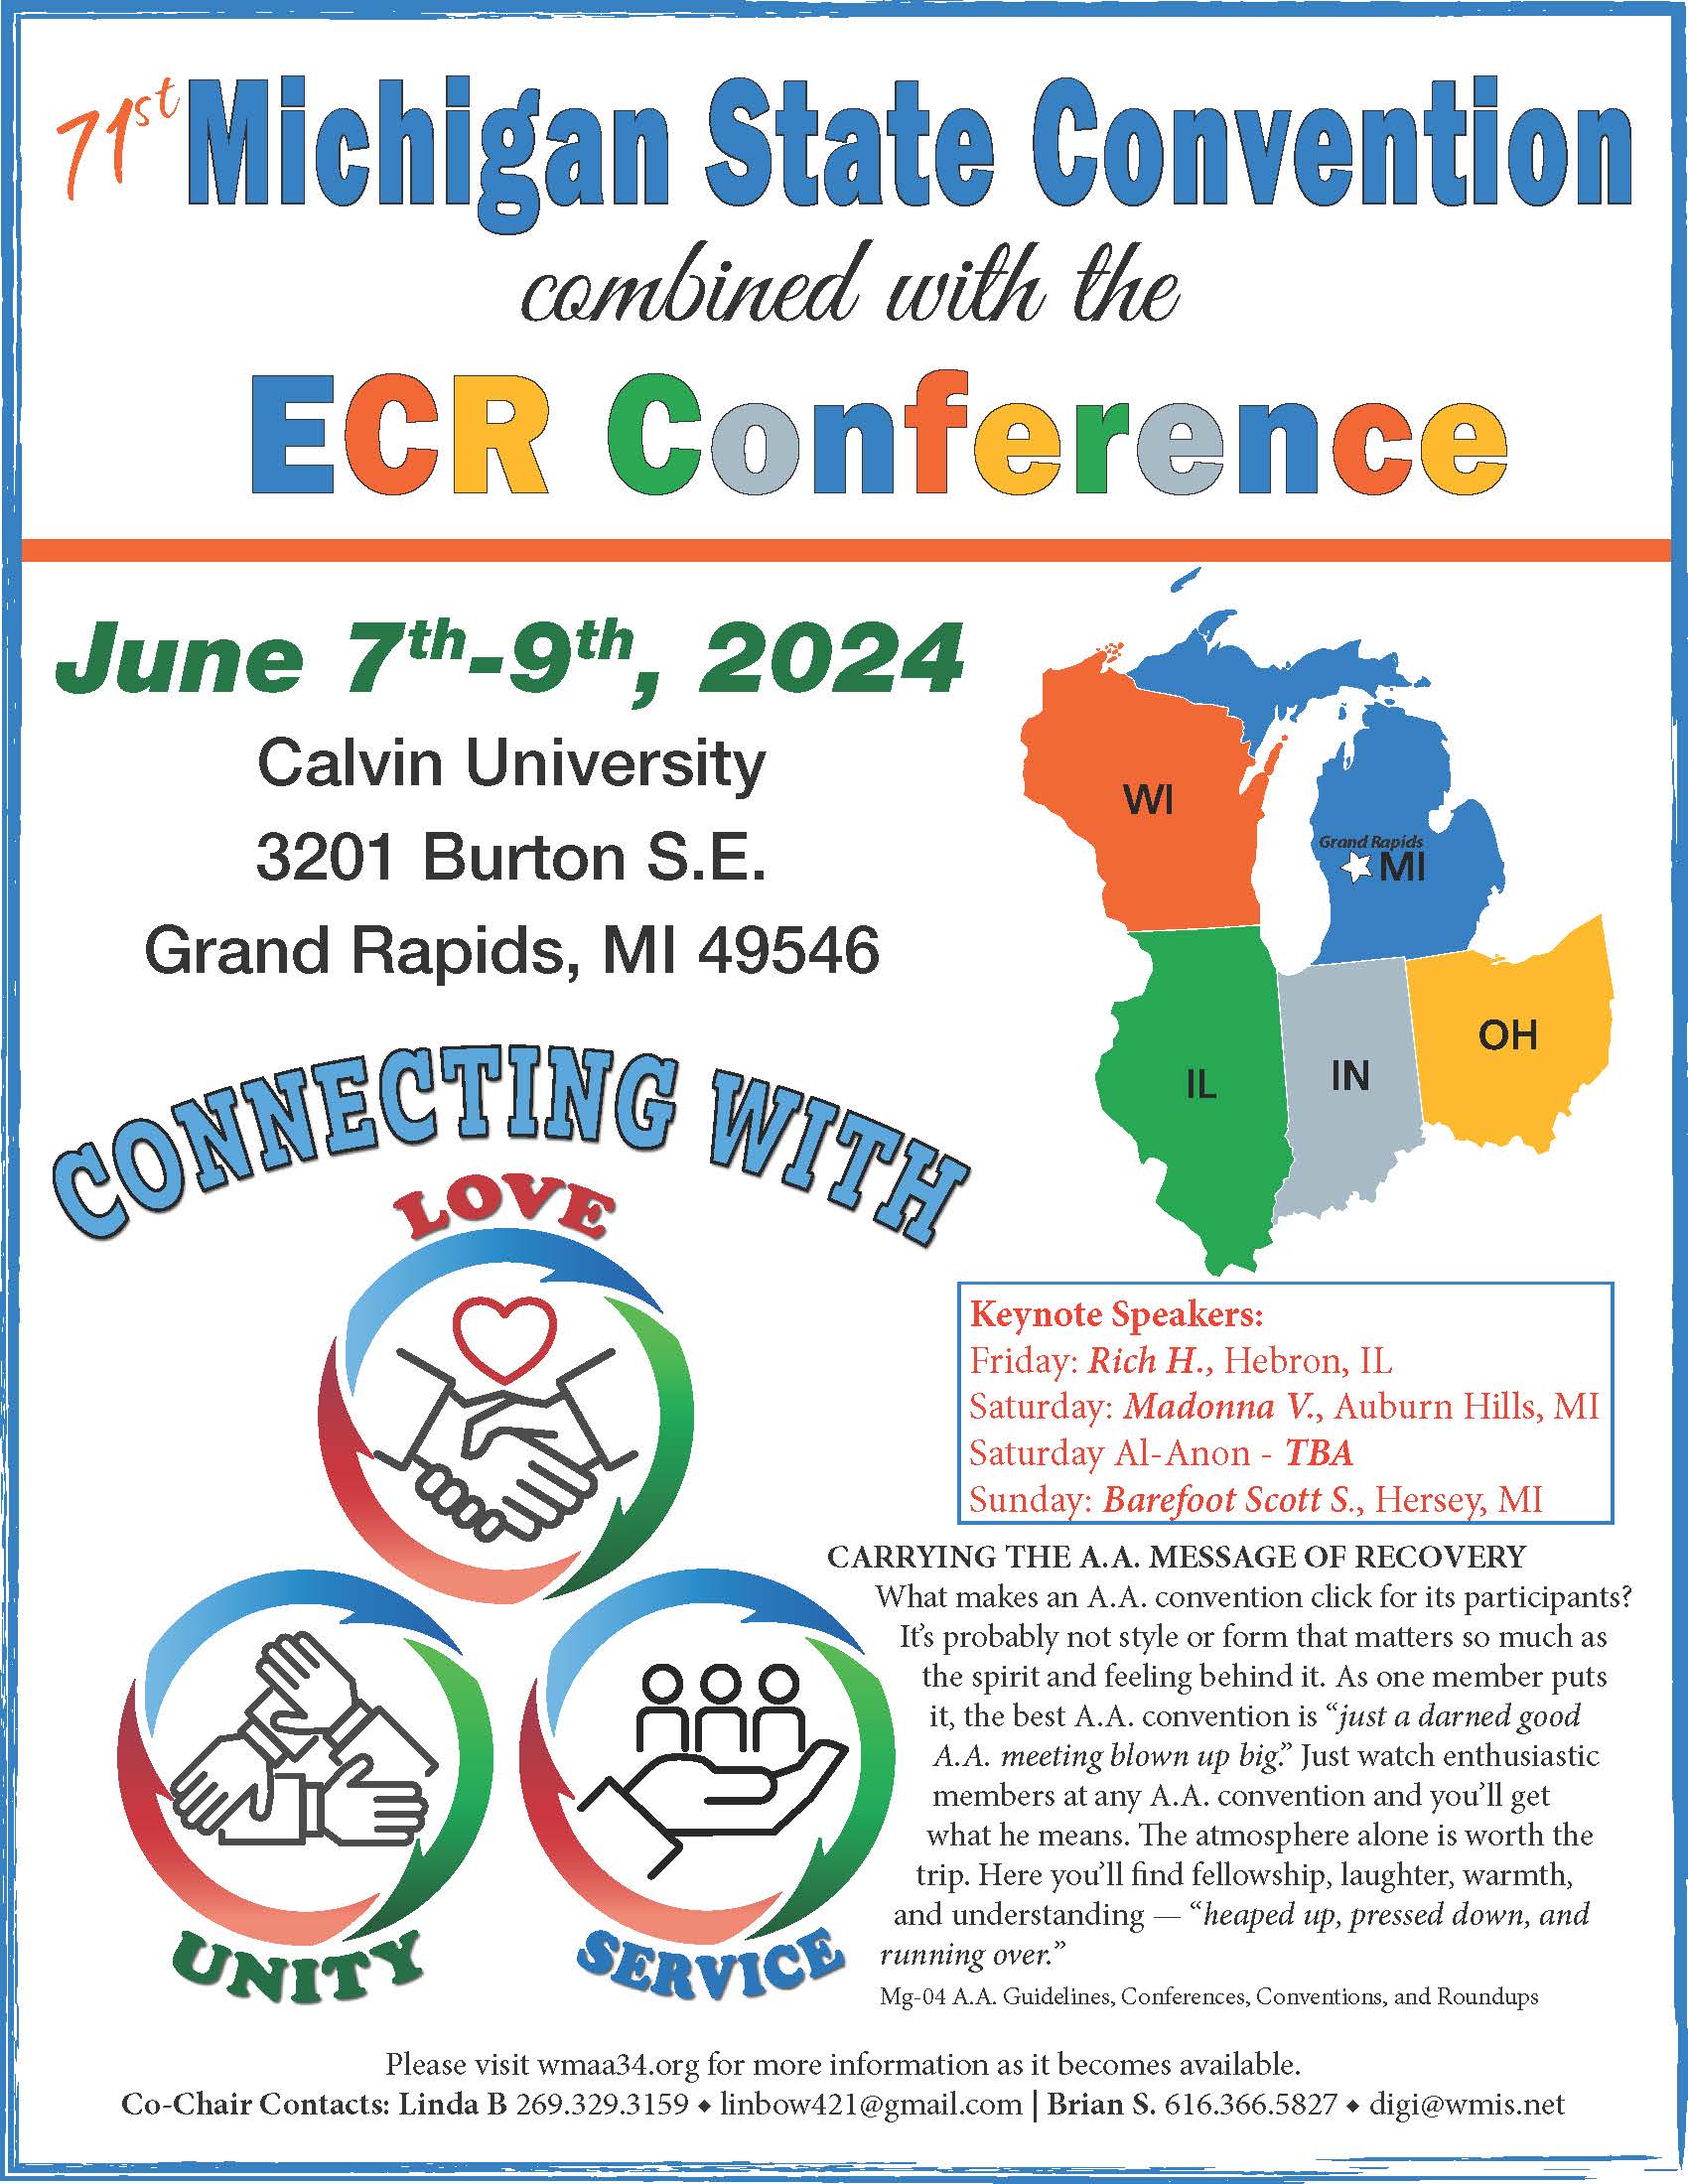 2024 State Convention/ECR Conference